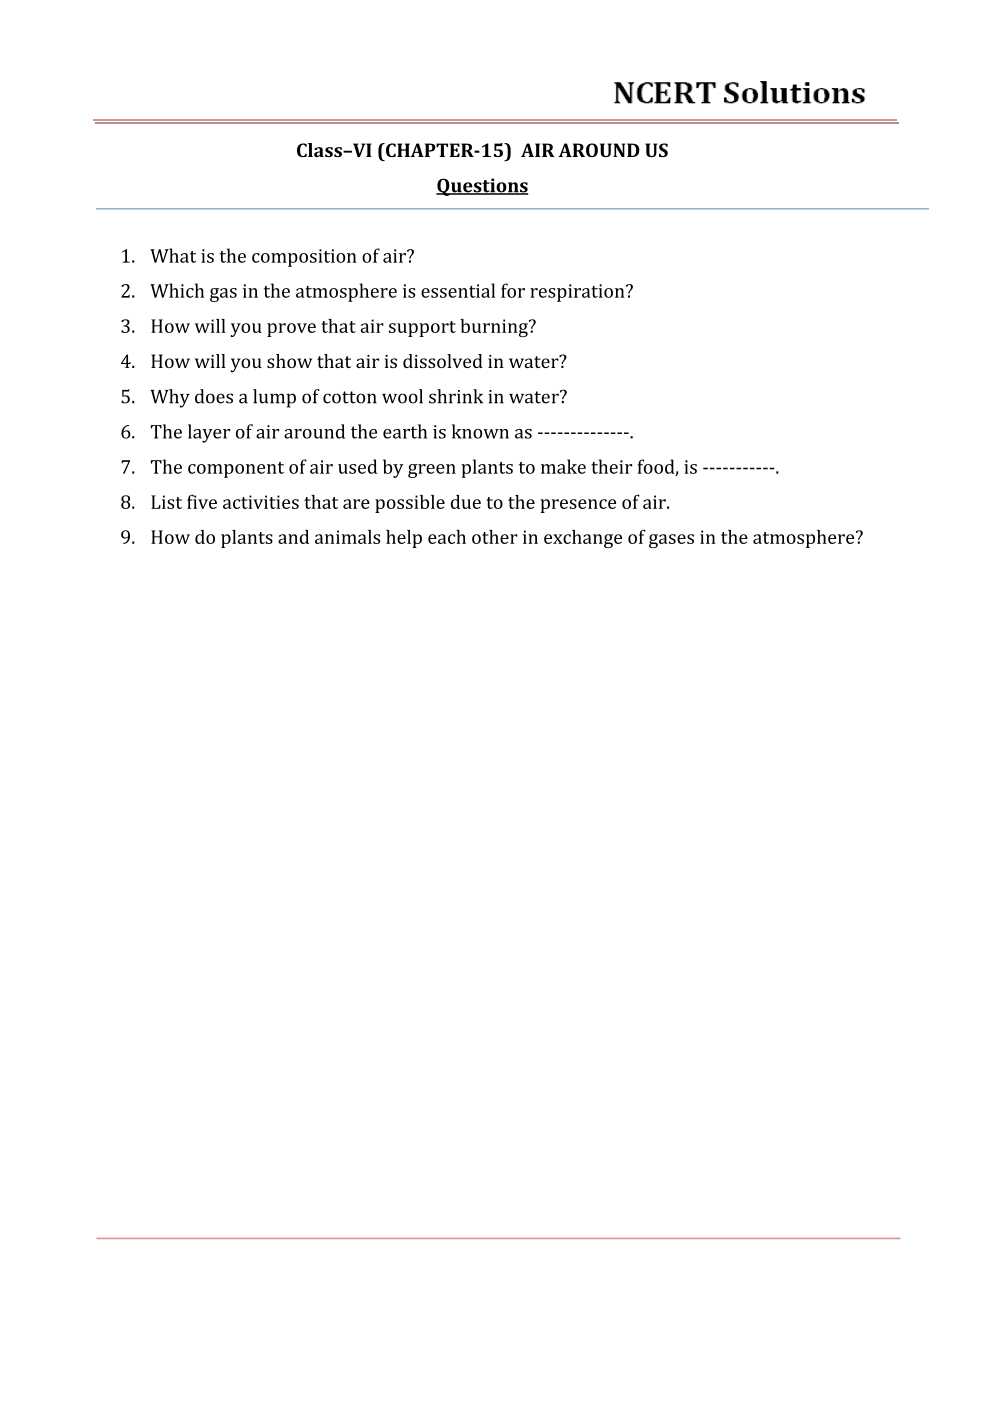 NCERT Solutions For Class 6 Science Chapter 15